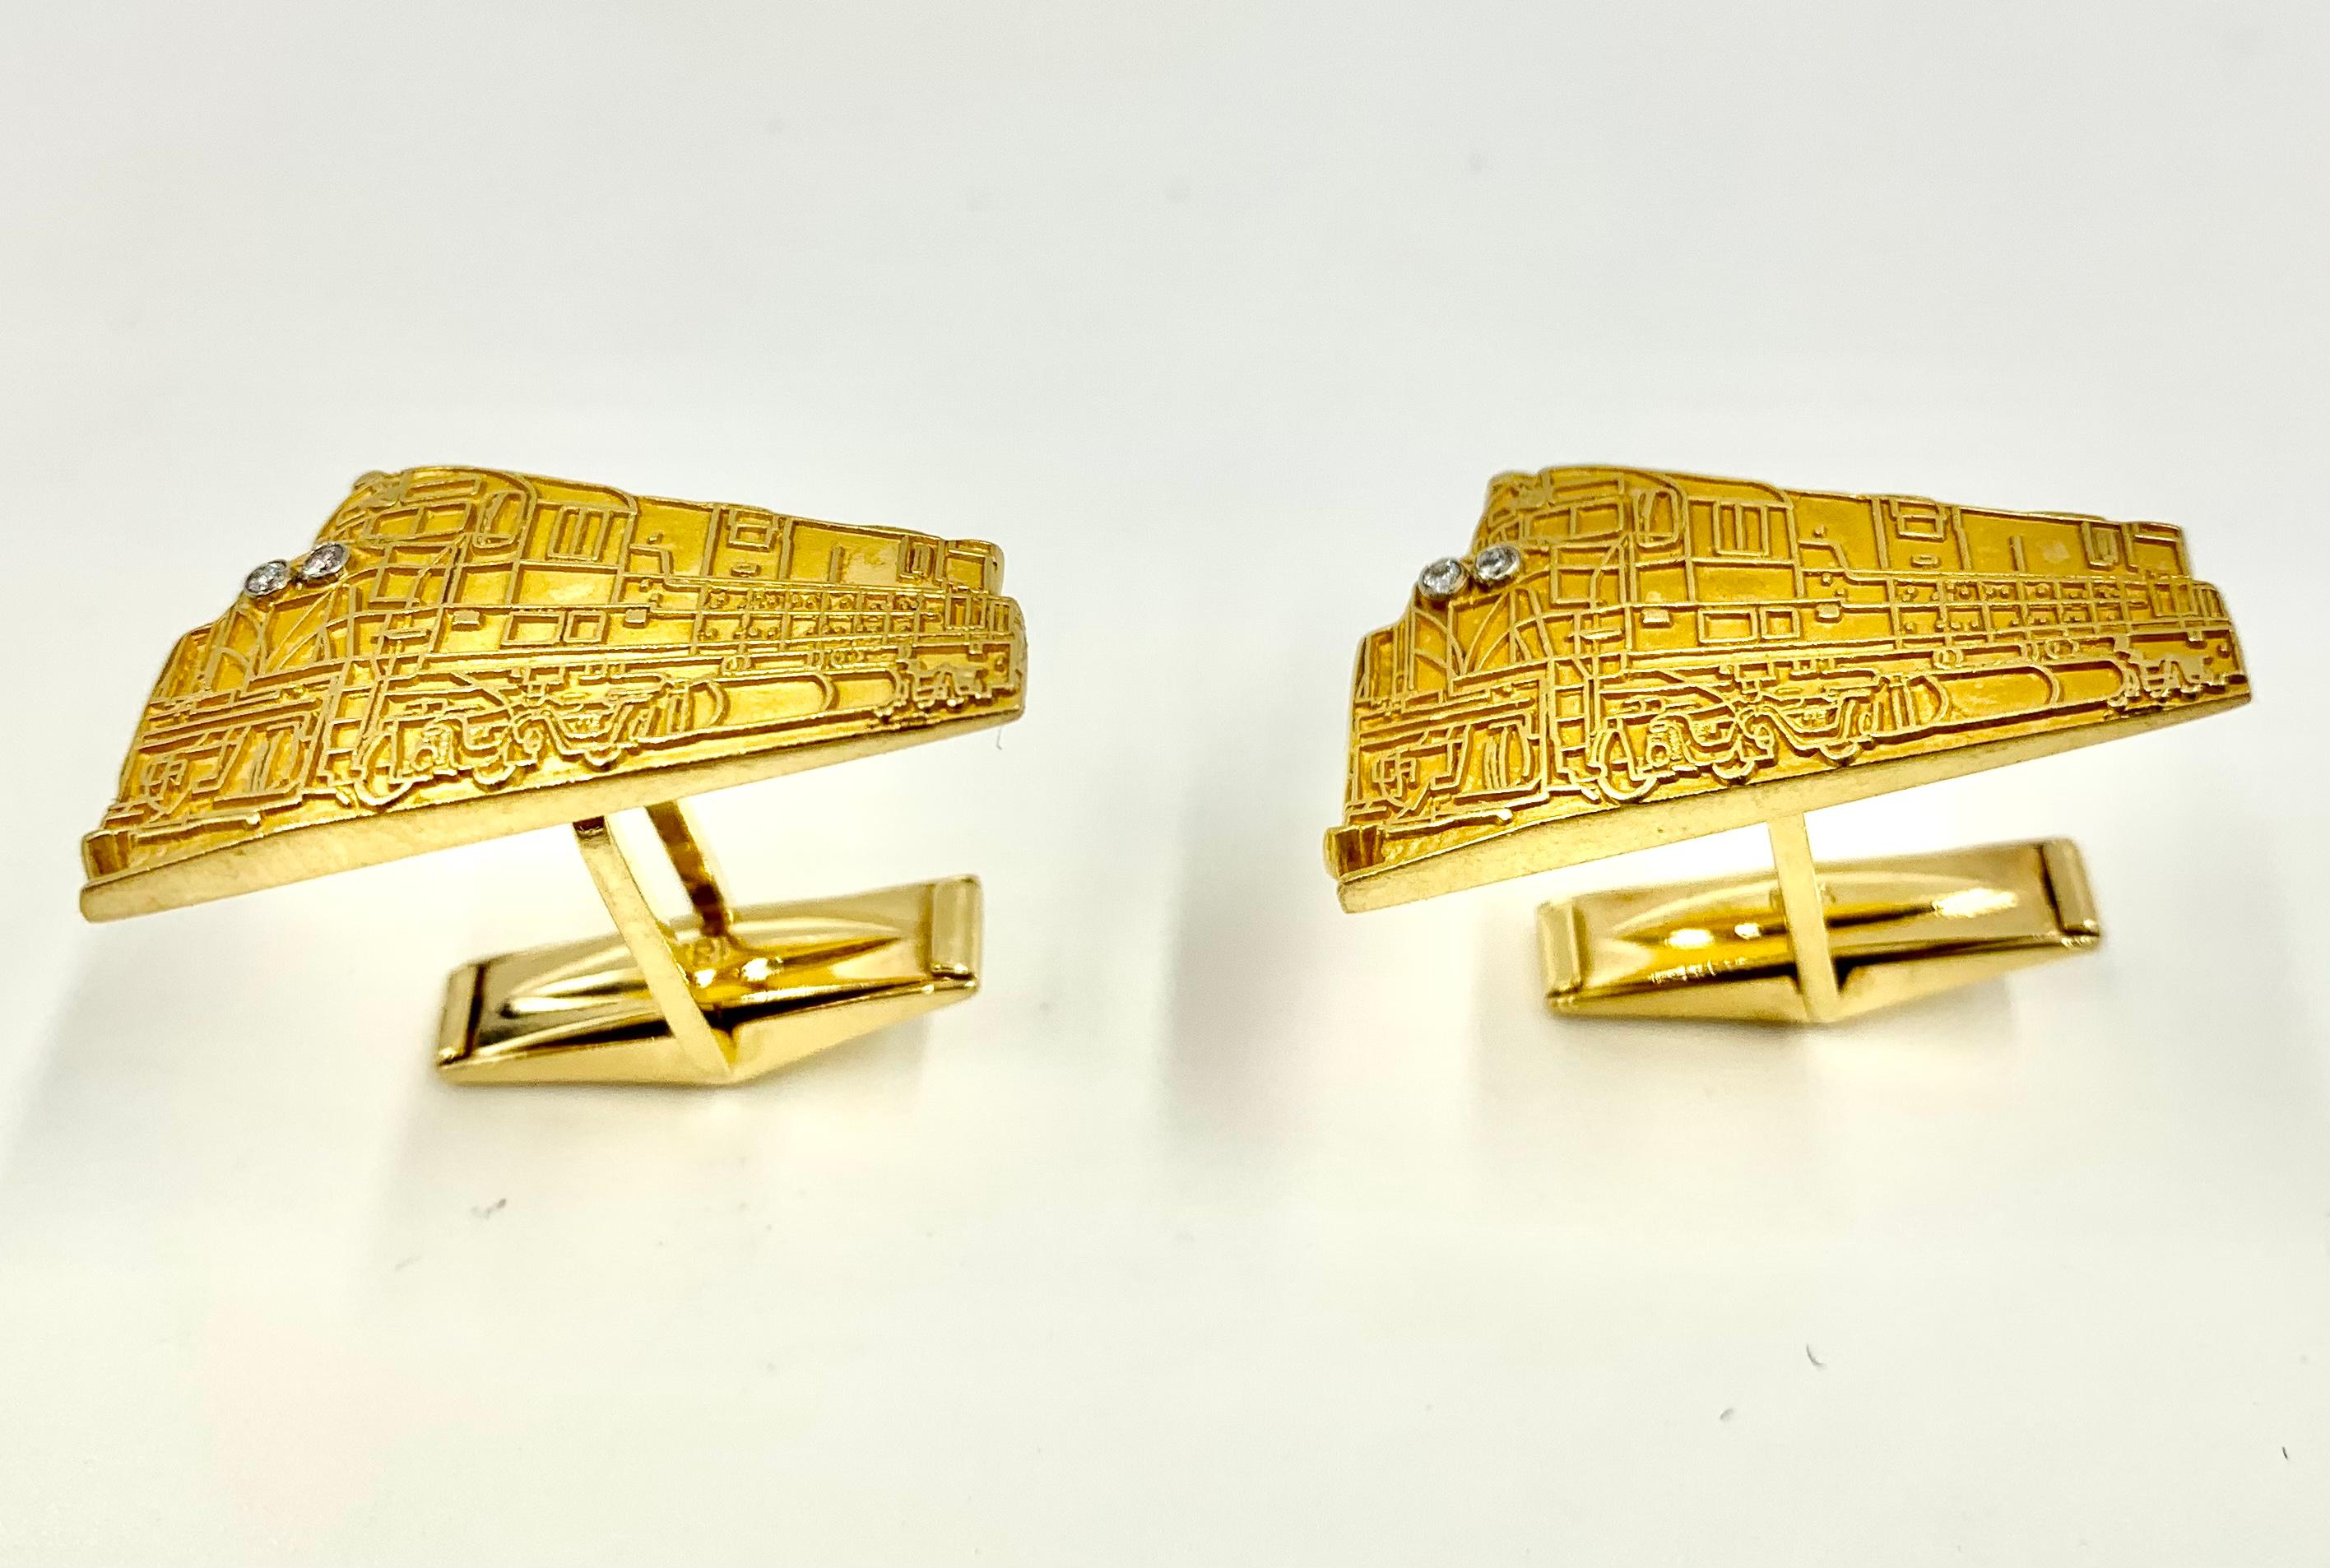 Striking, large Art Deco Cartier Orient Express diamond and 18K gold vintage cufflinks.
First half of 20th Century
The legendary Paris to Istanbul Orient Express, synonymous with luxury travel, romance, mystery and adventure has set the stage for